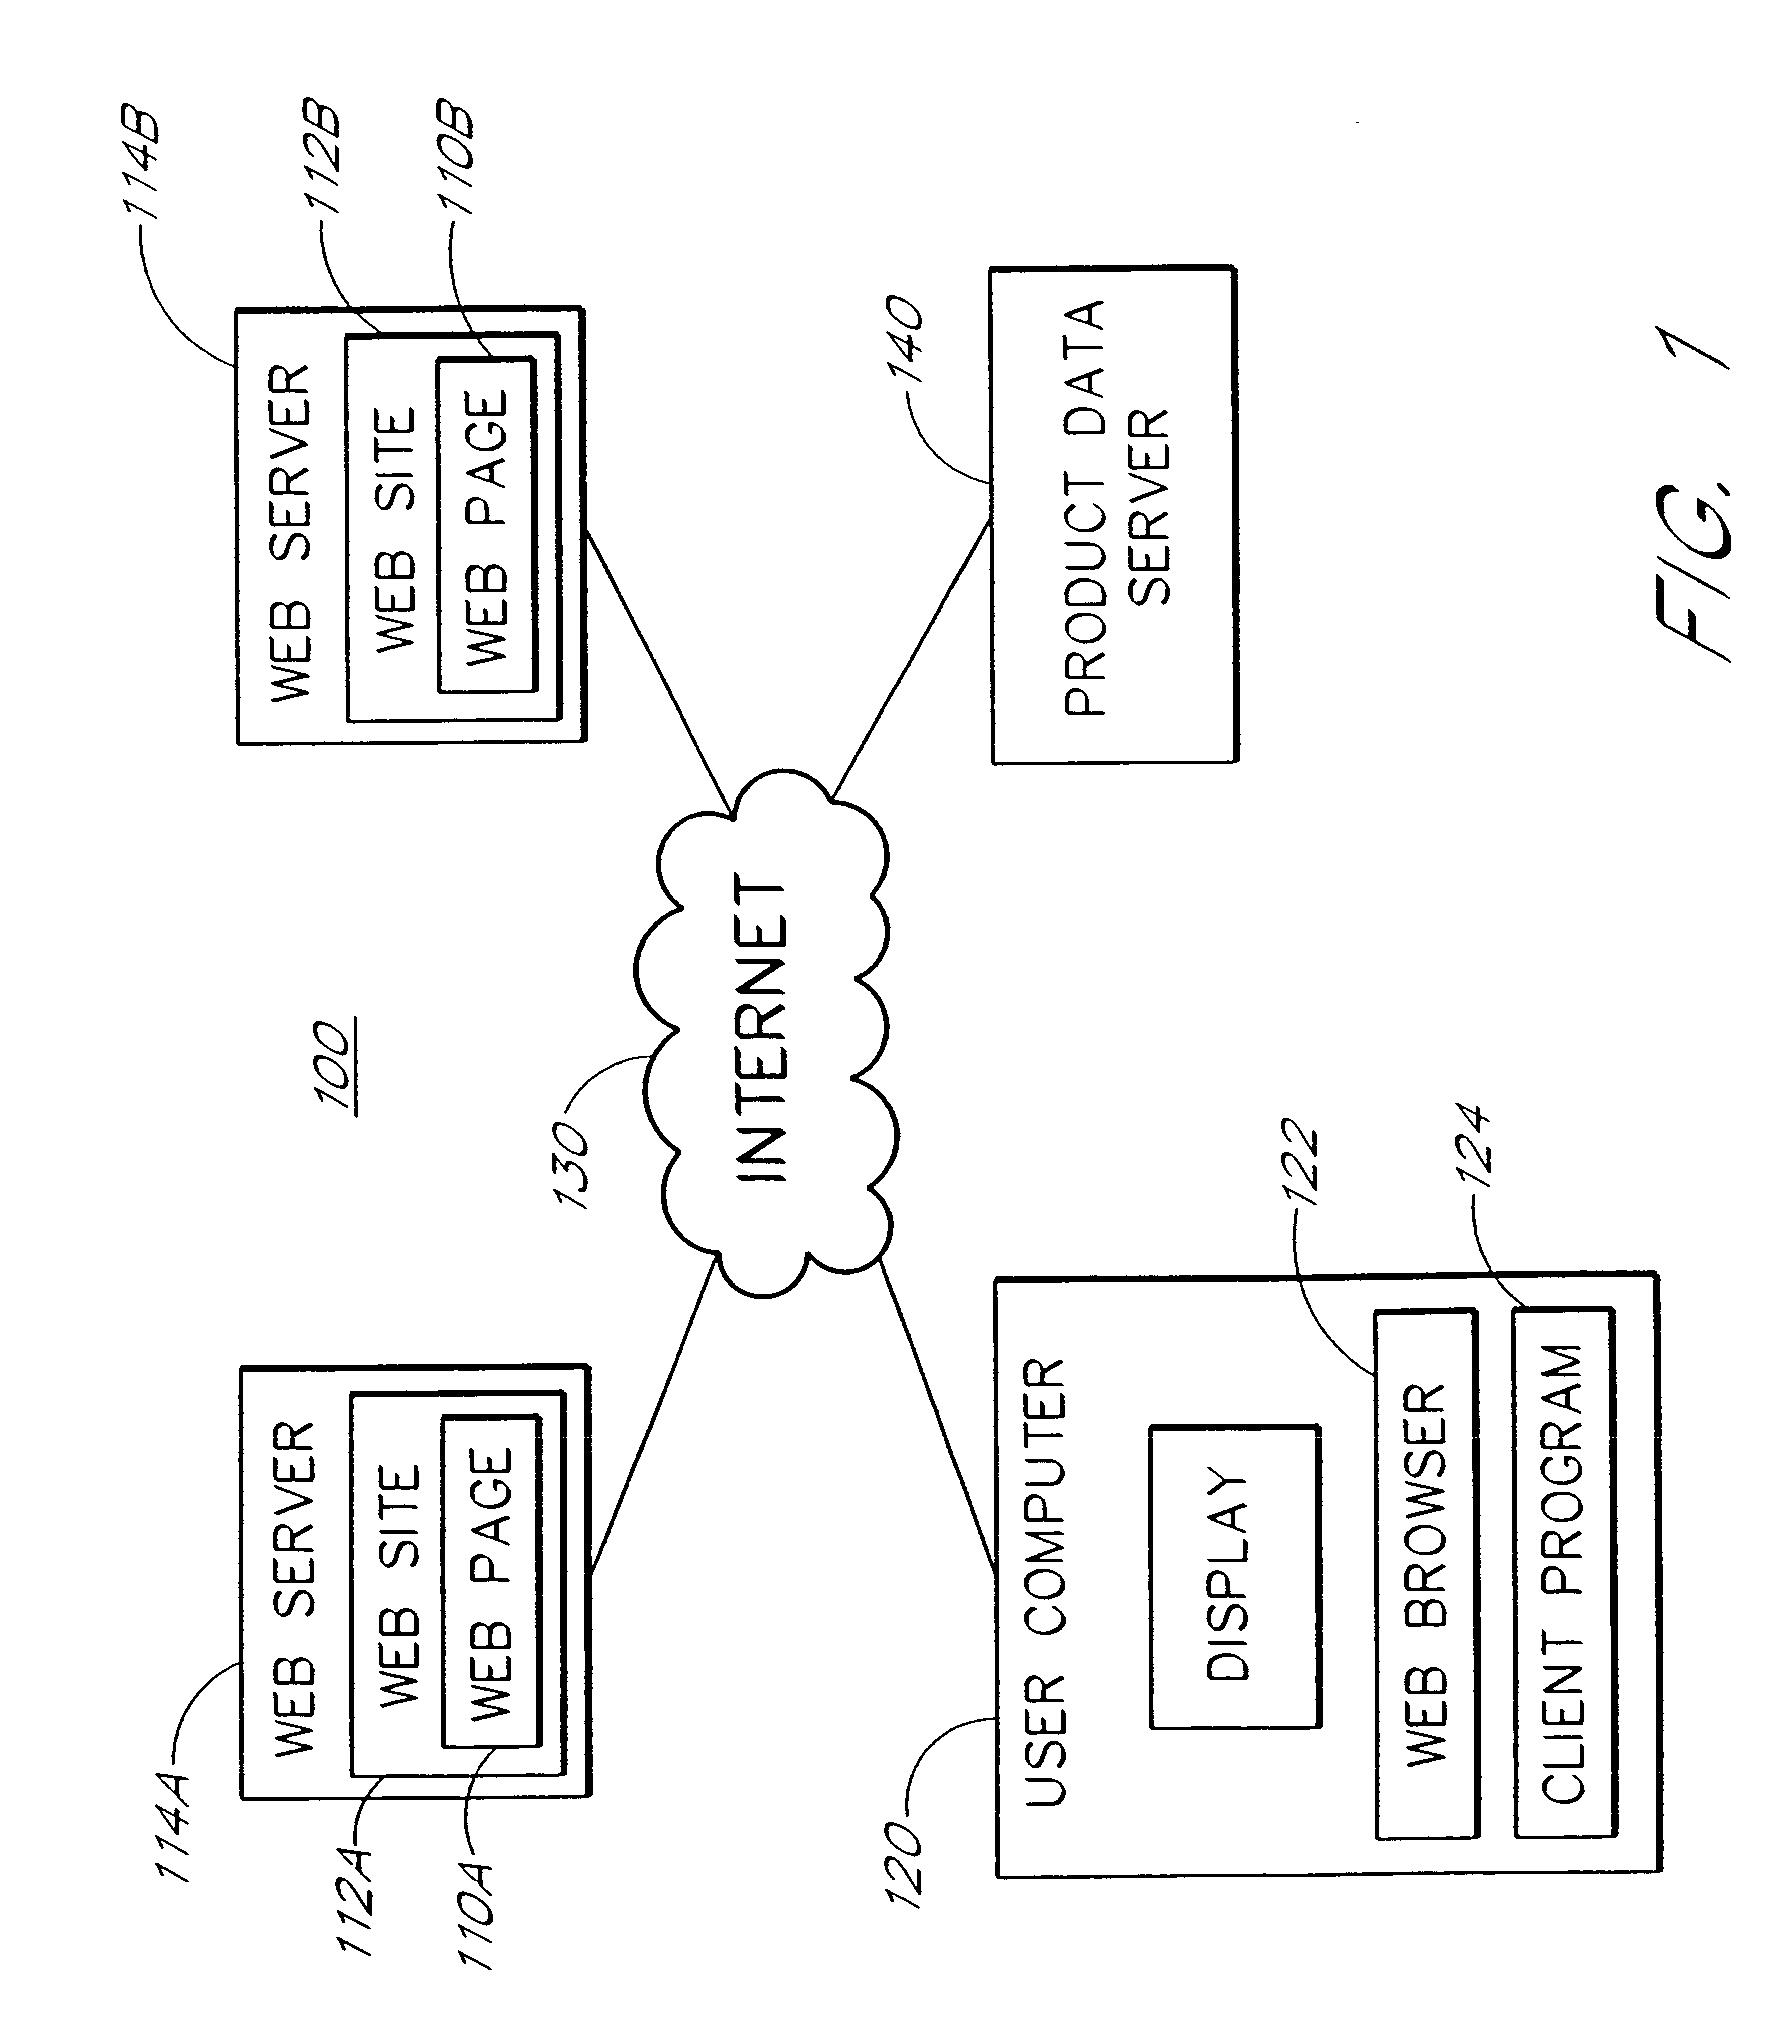 Service for enabling users to share information regarding products represented on web pages